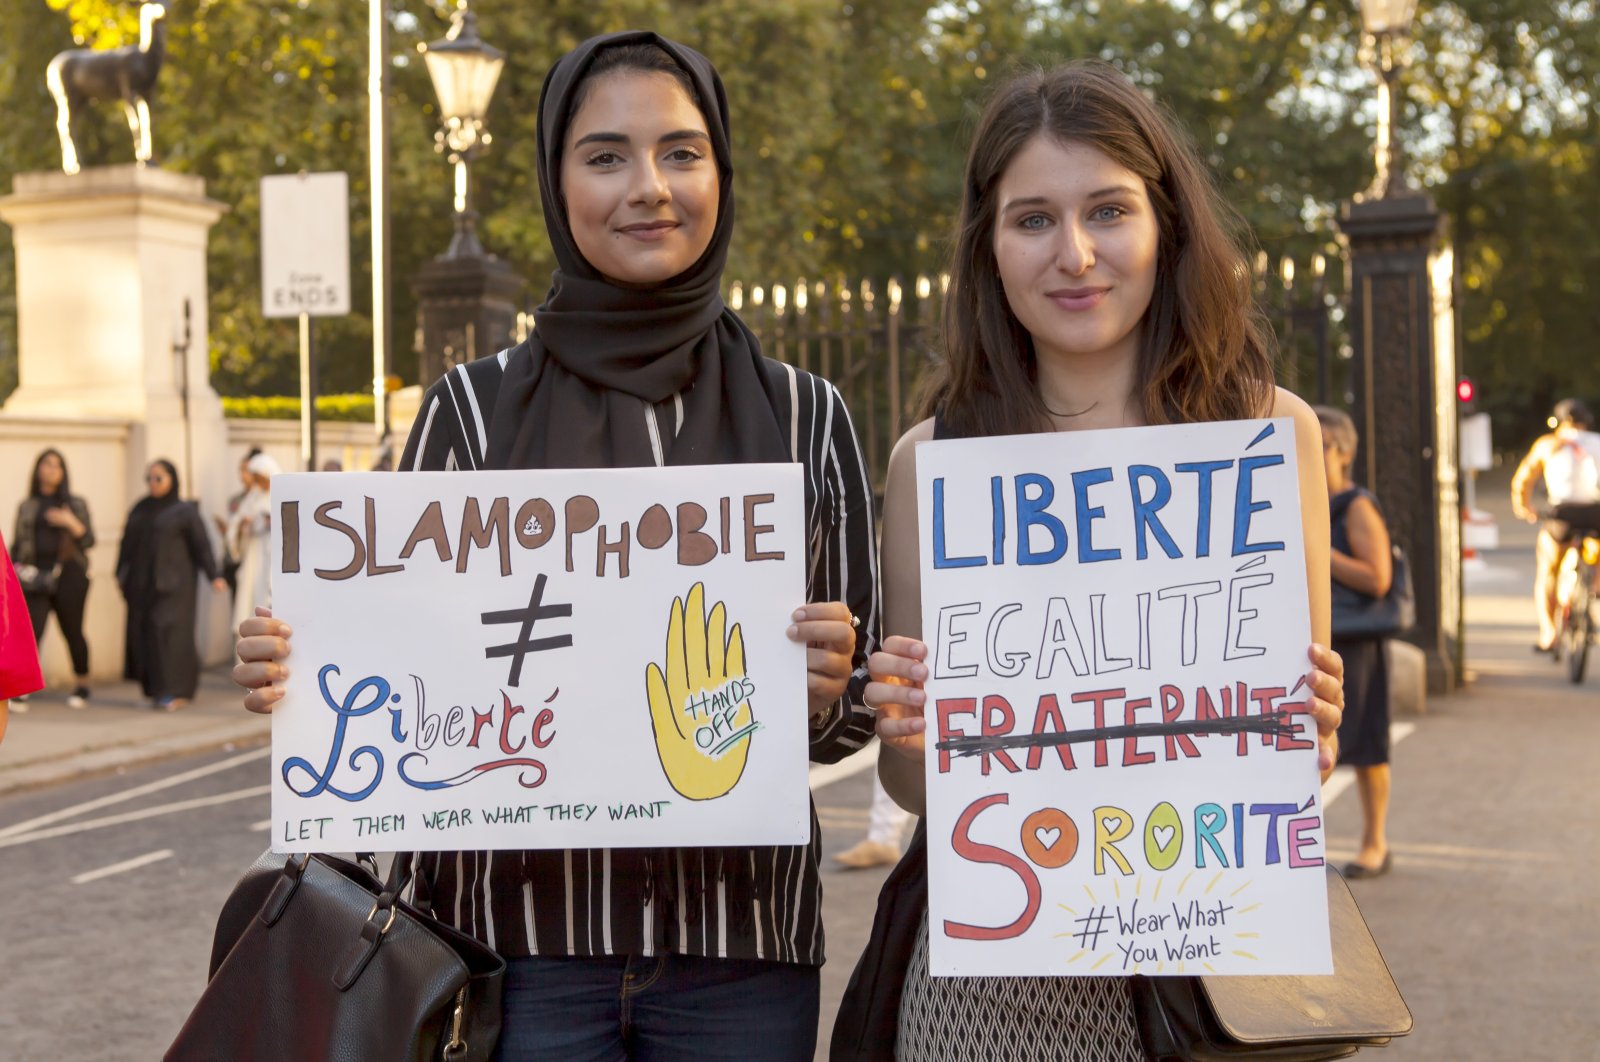 Europe, and especially France needs to understand that hatred against Muslims will only serve to disrupt peace in the continent. Discrimination against the faithful must end, once and for all. (Shutterstock Photo)